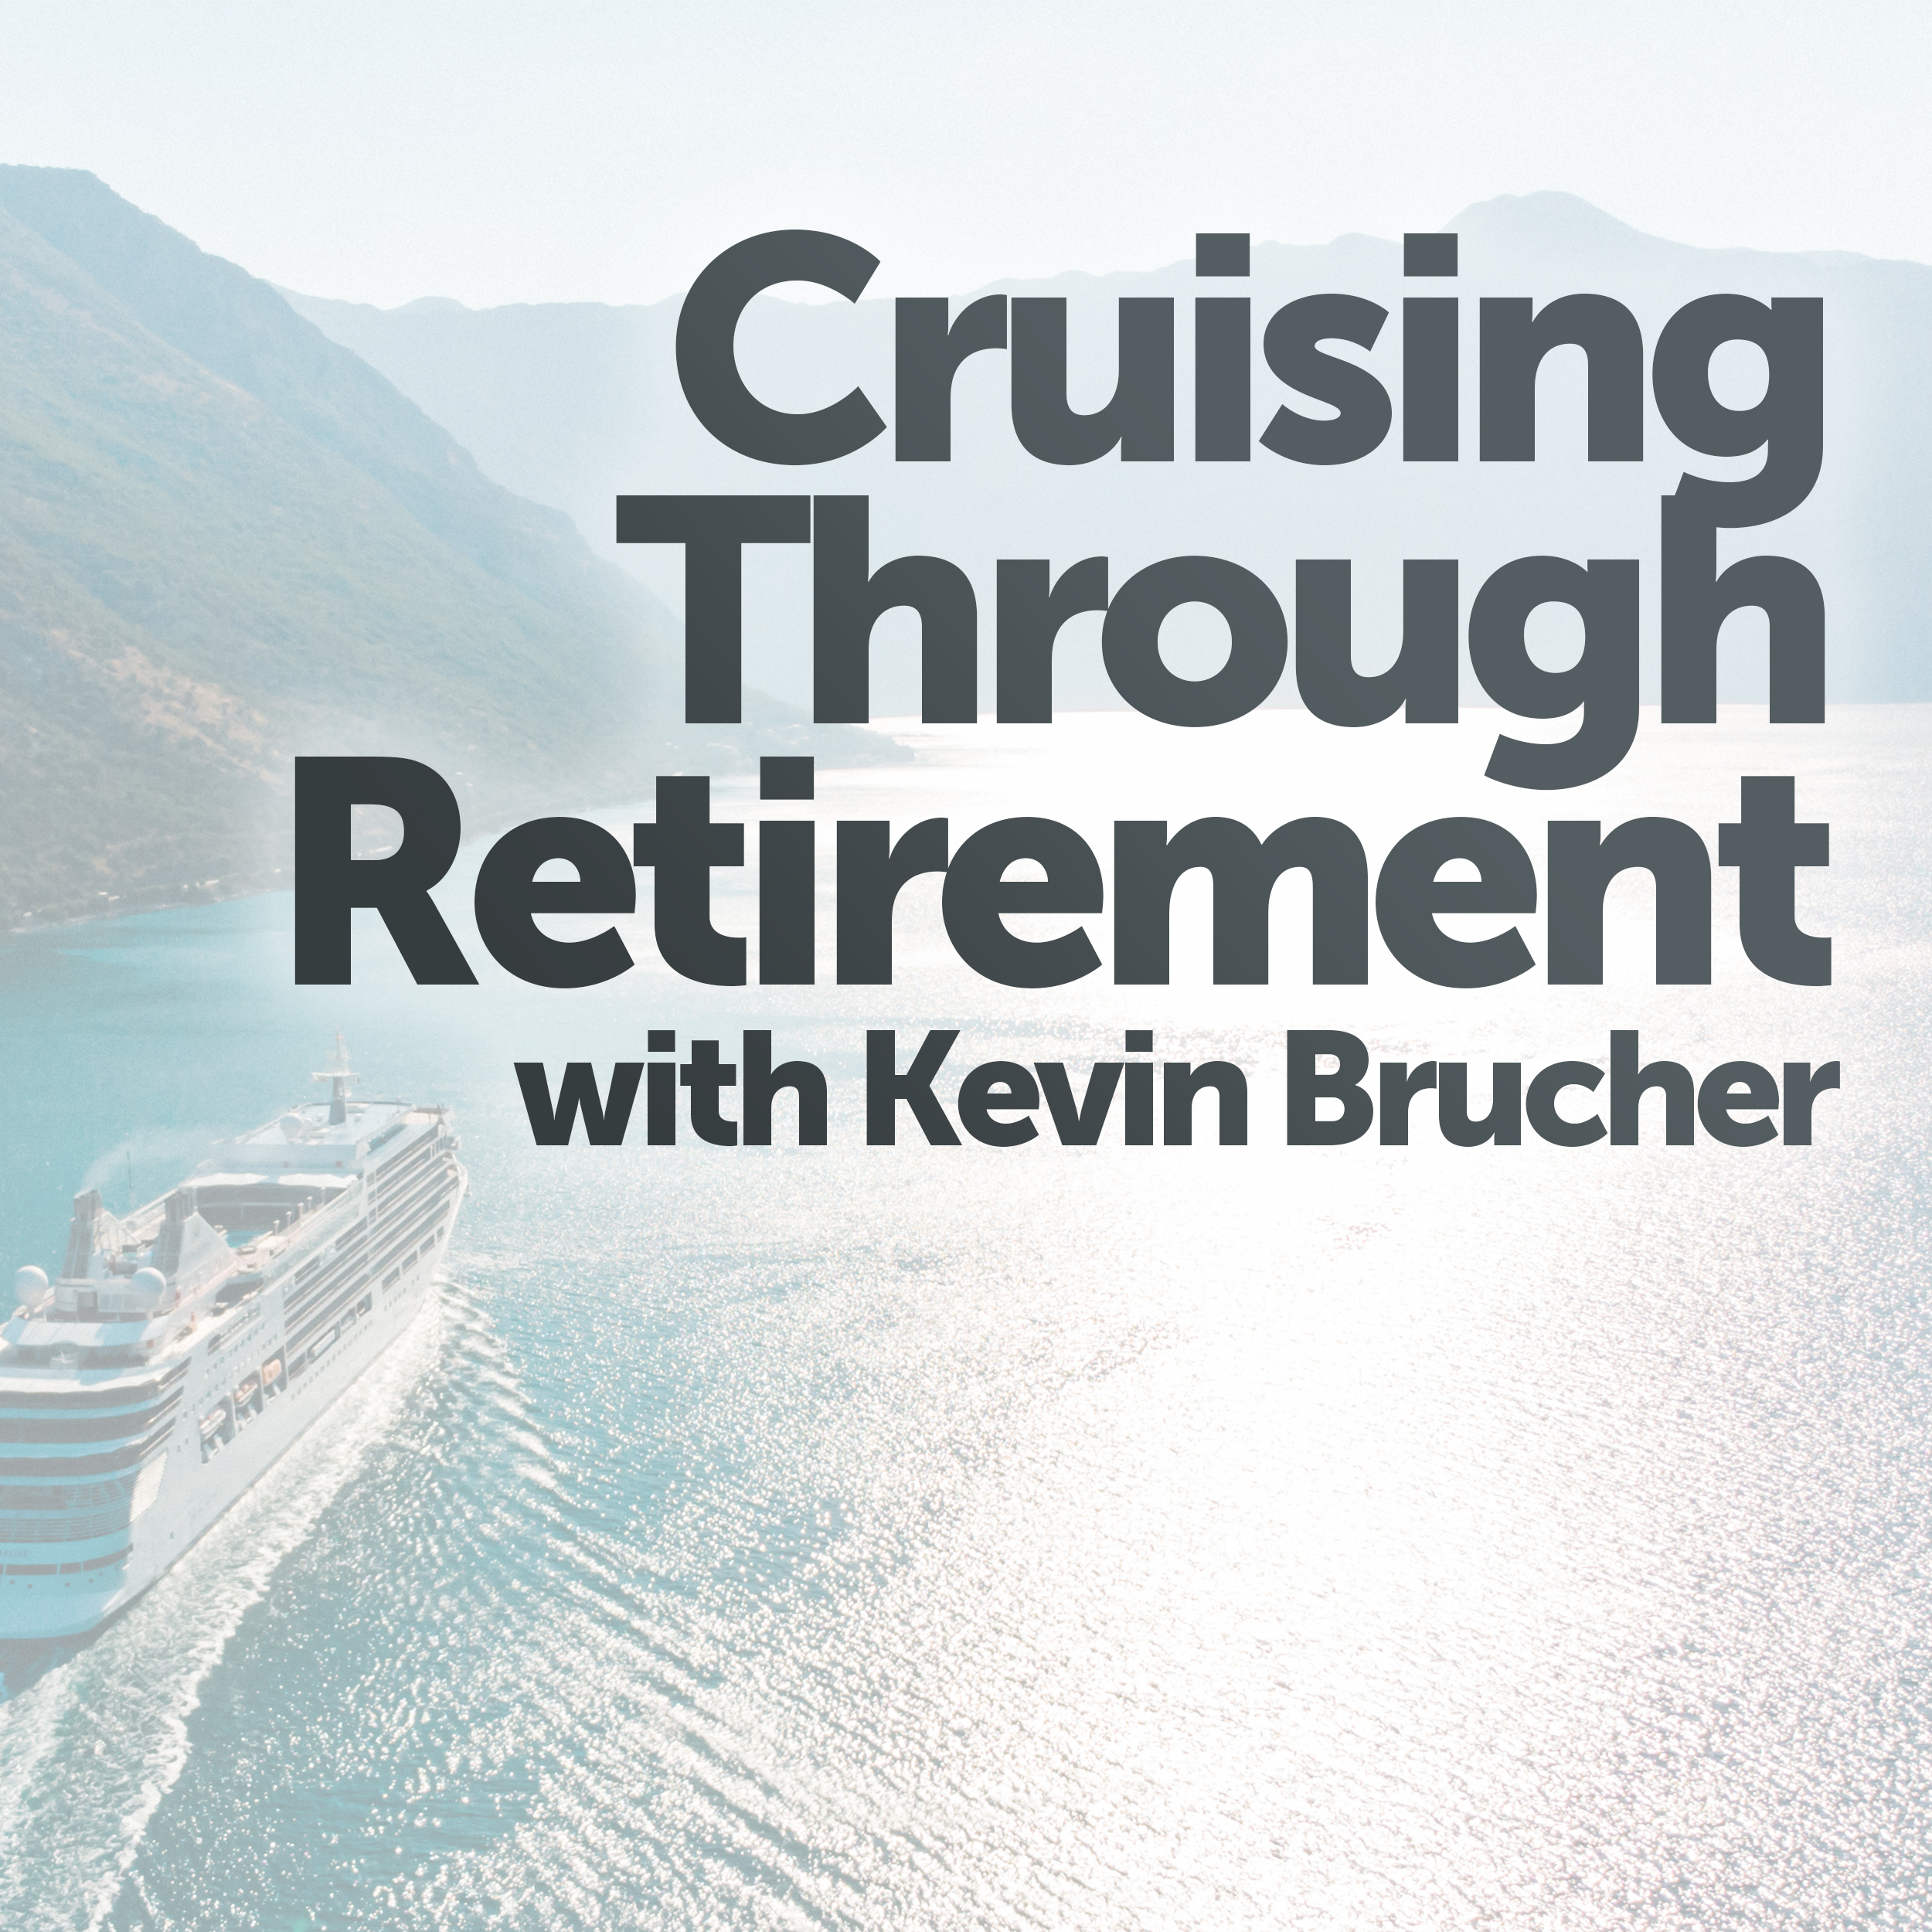 Ep 94 Cruising Through Retirement This week Kevin Brucher talks taxes that can sneak up on you as you go through retirement.